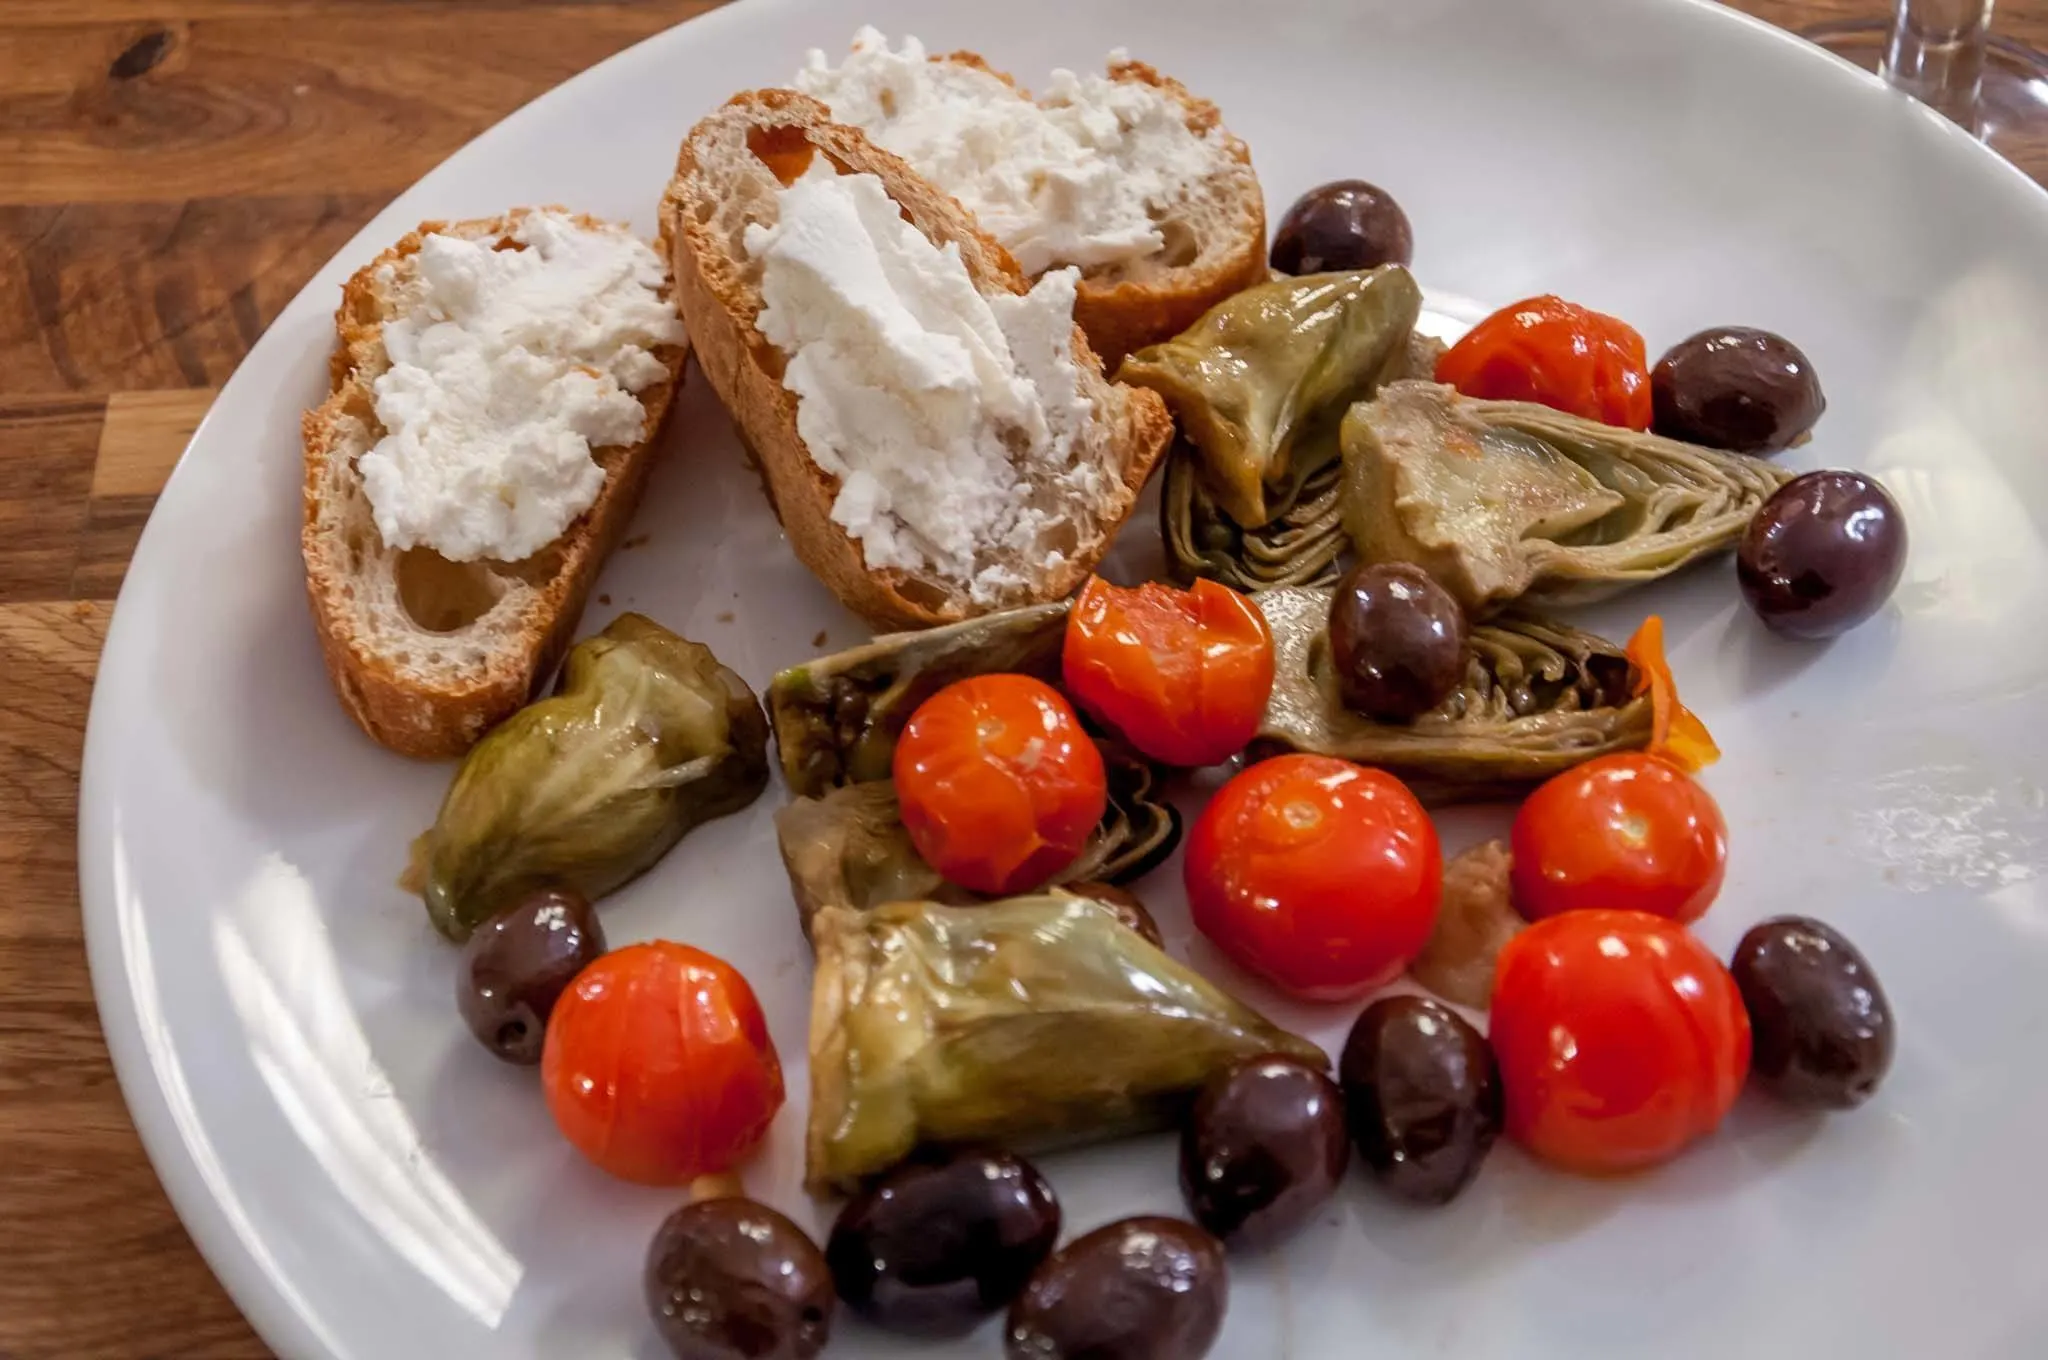 Artichokes, olives, tomatoes, and French bread